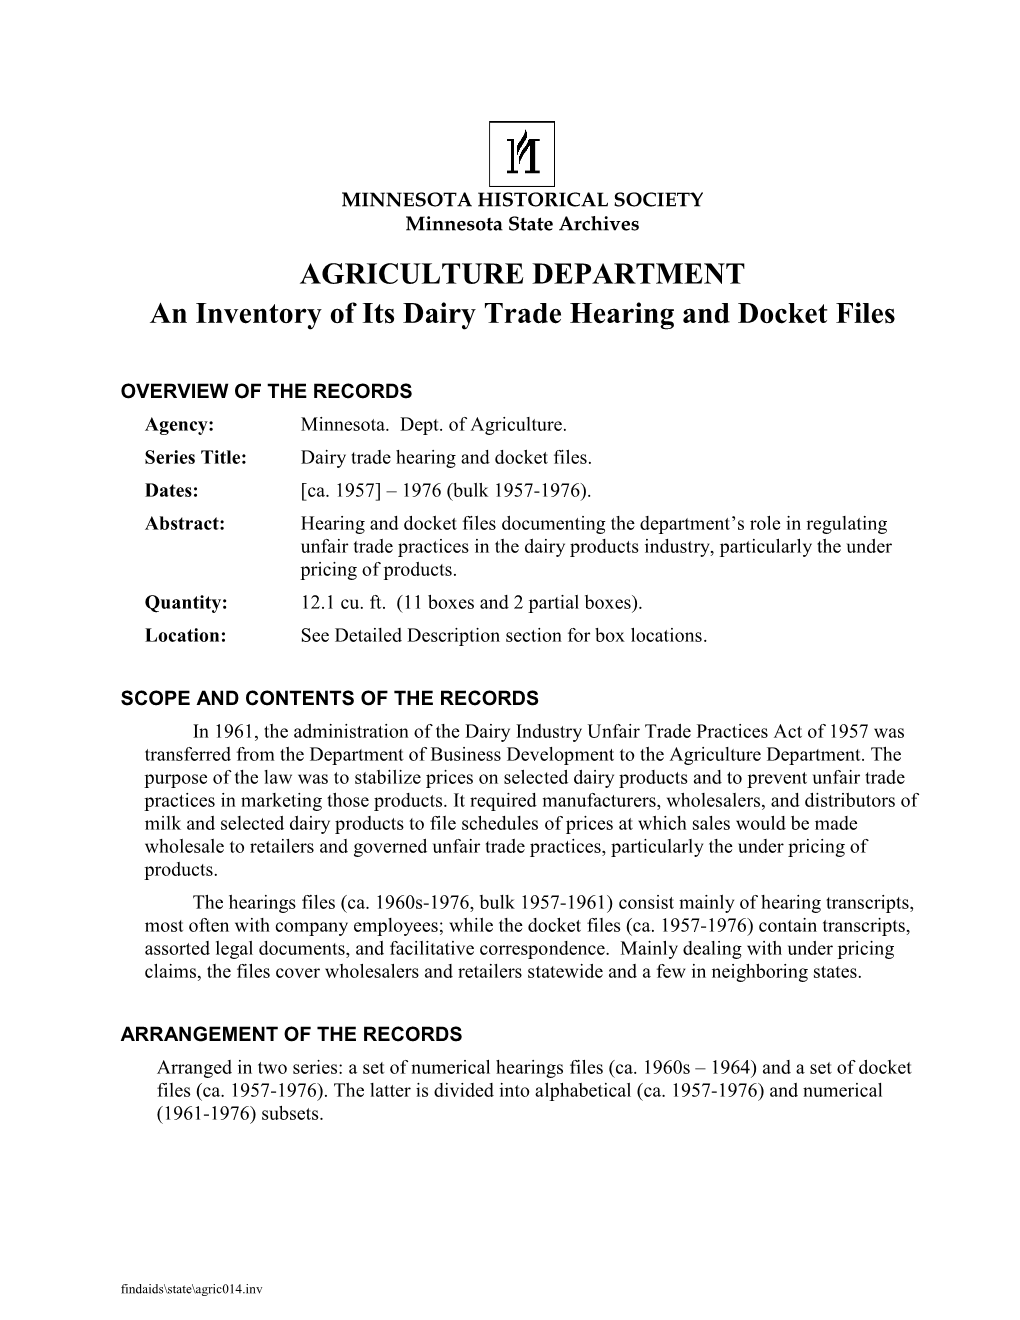 An Inventory of Its Dairy Trade Hearing and Docket Files